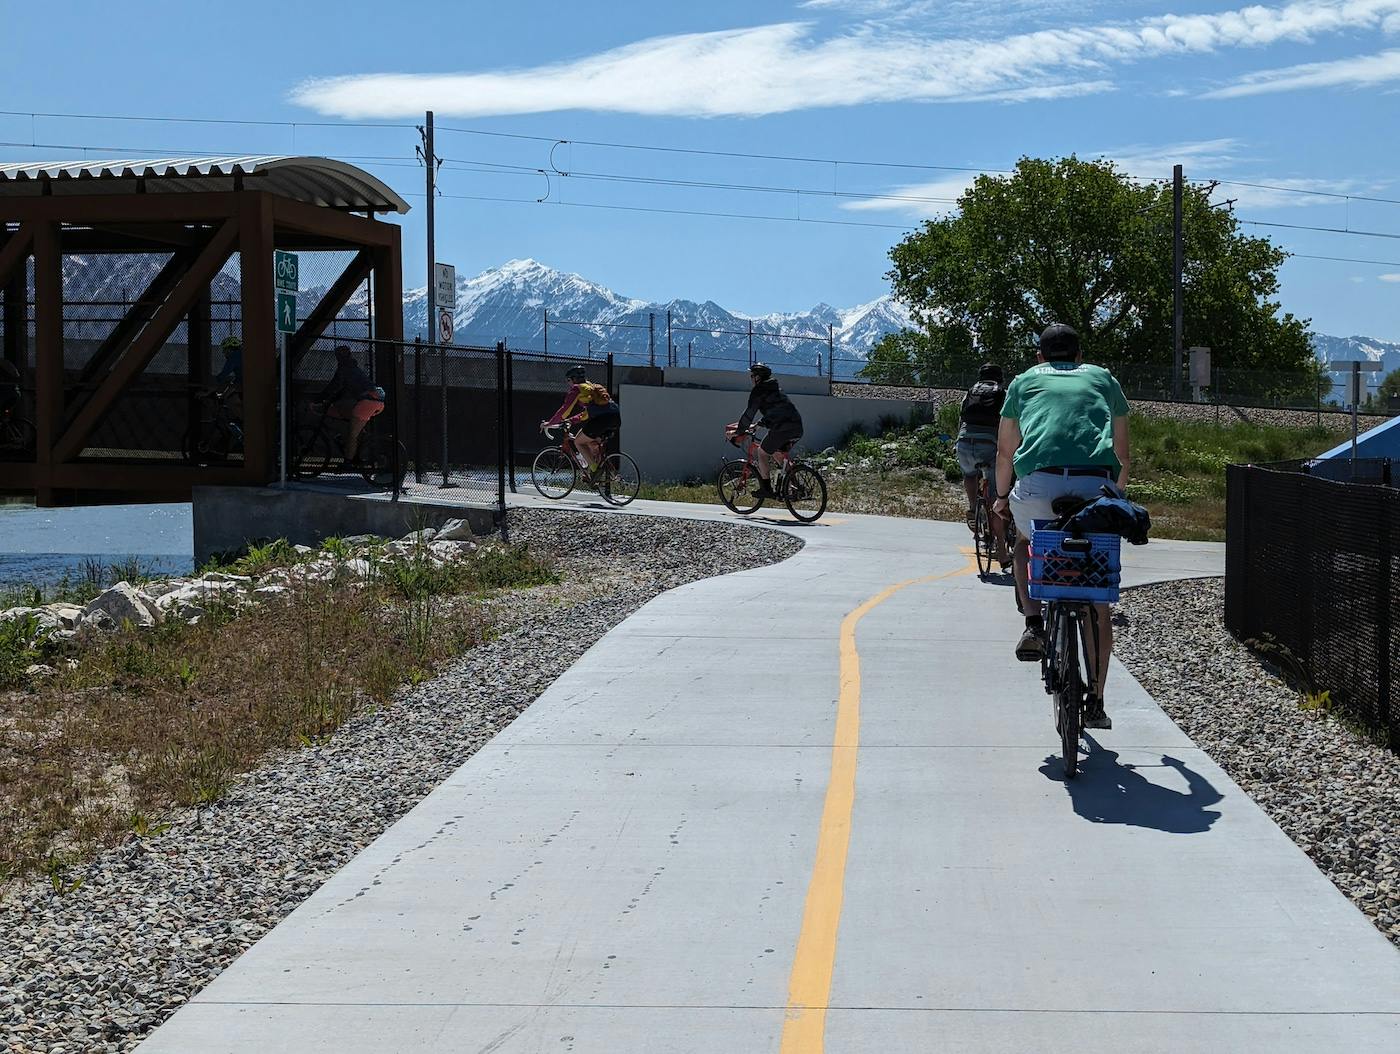 Imagery for the Investments in Infrastructure and Community Make Salt Lake City a Great Place to Bike story